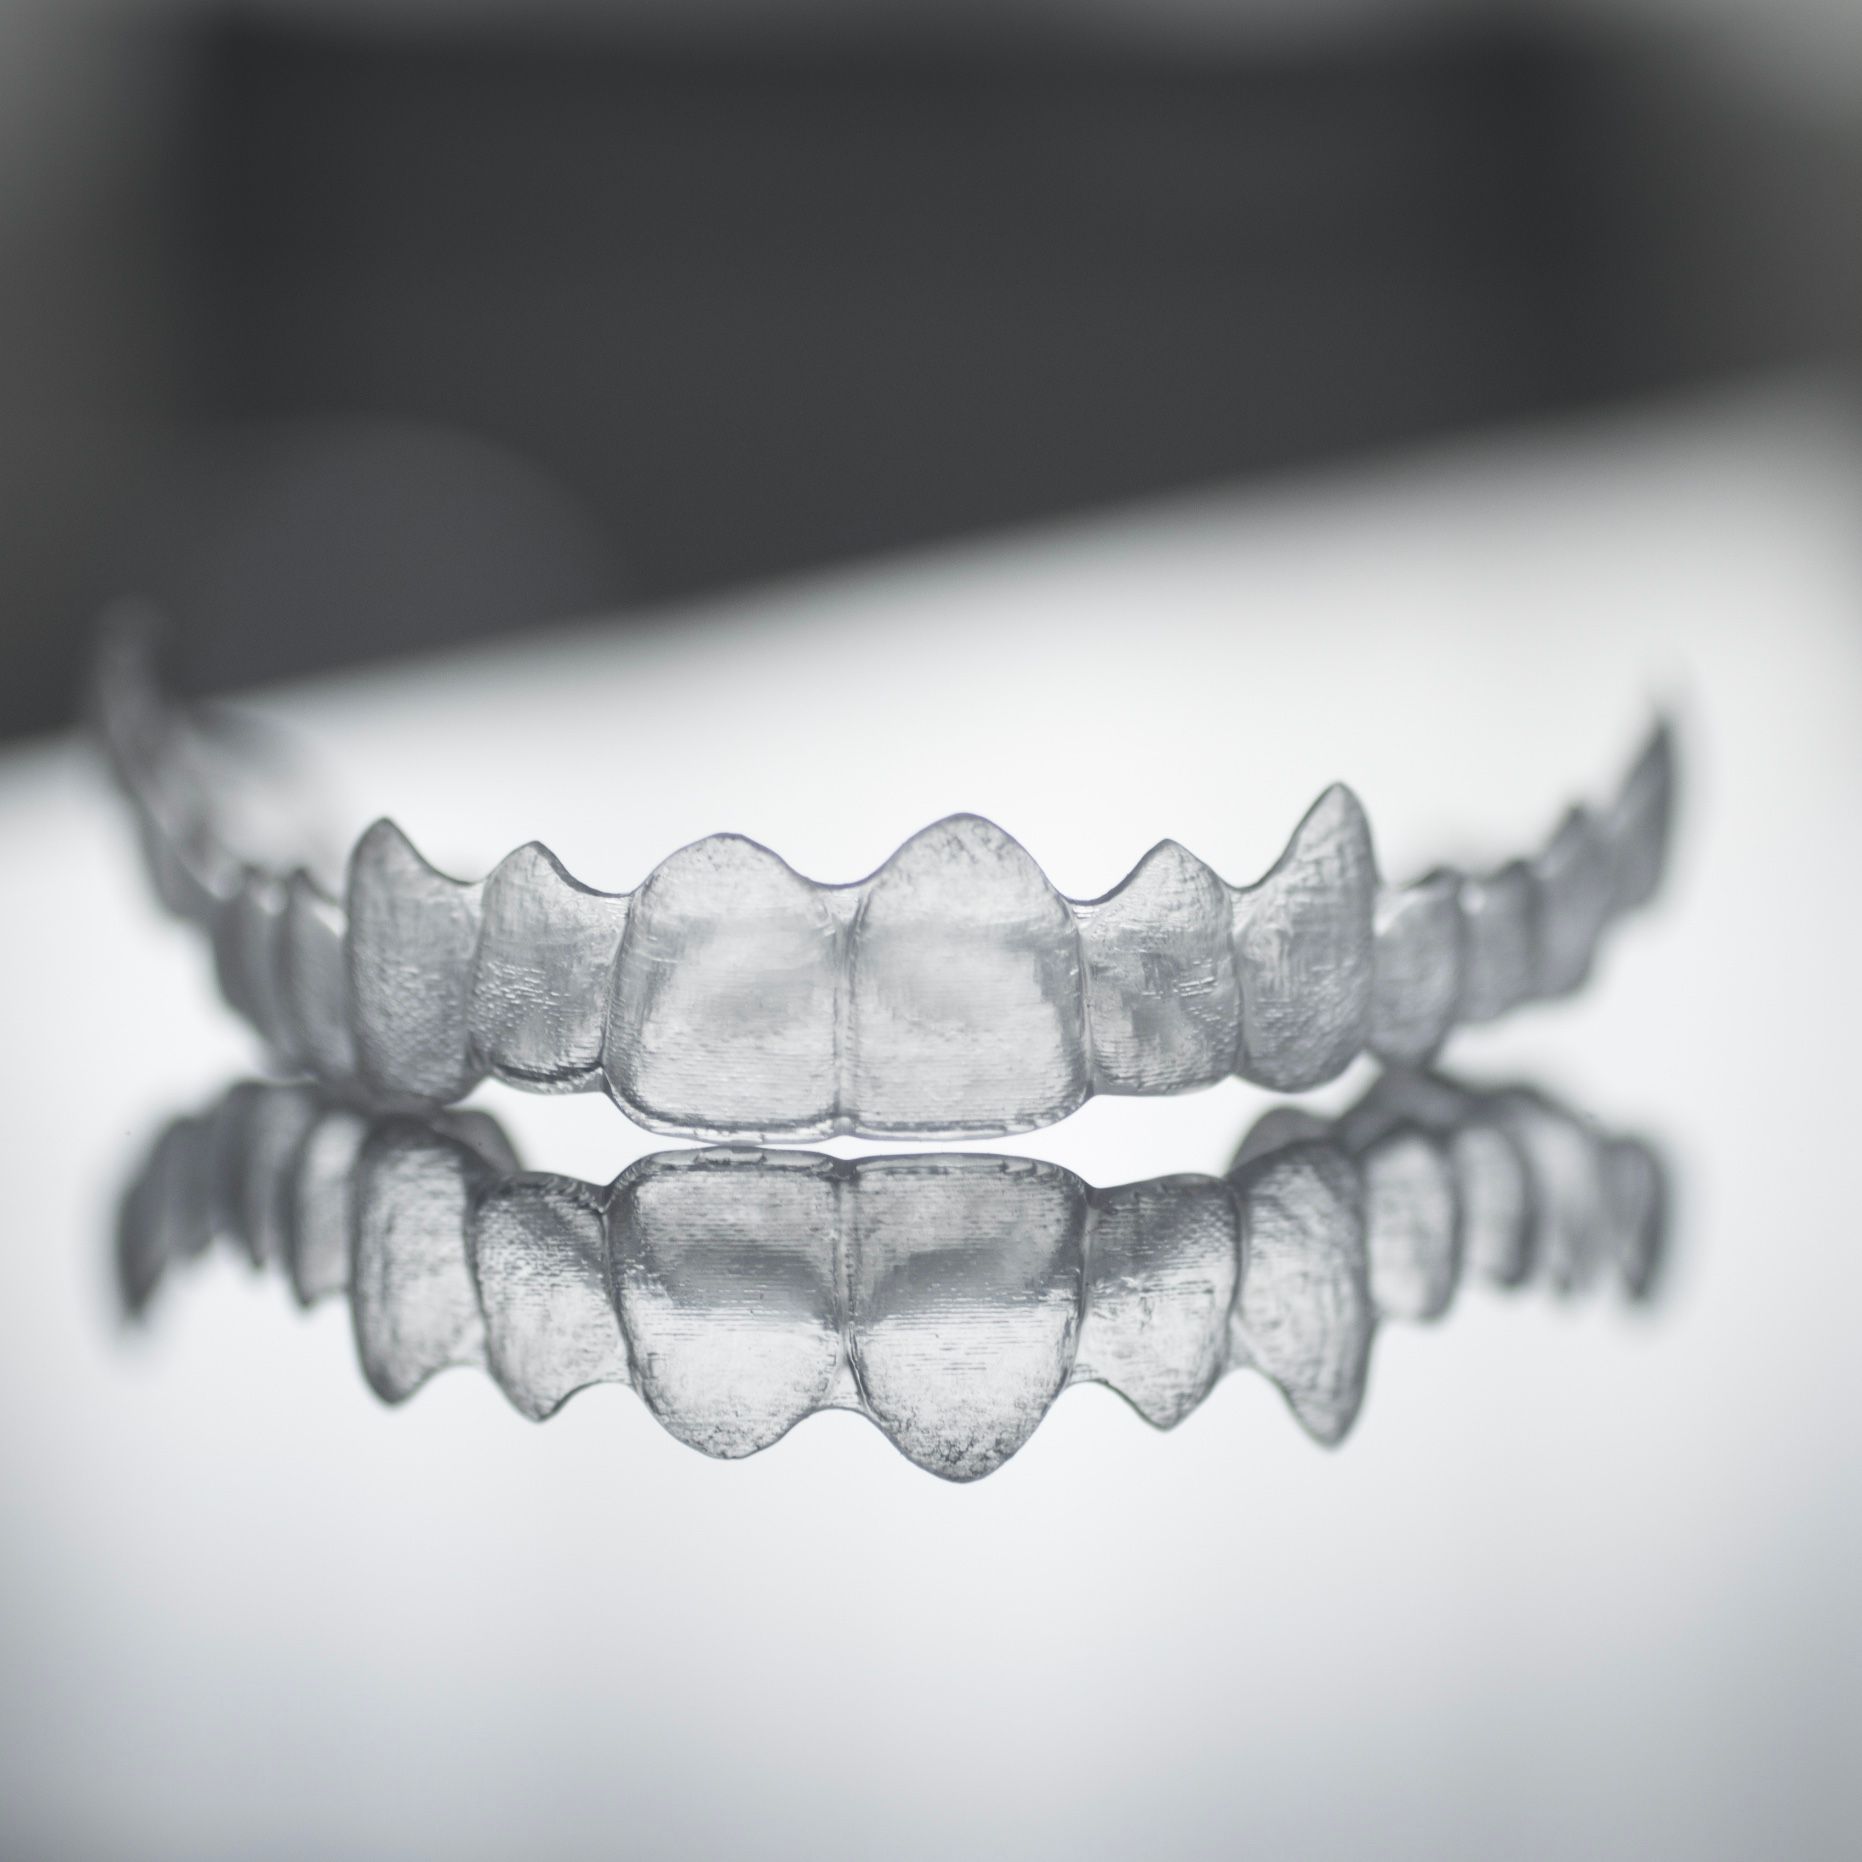 clear aligners sitting on a reflective surface